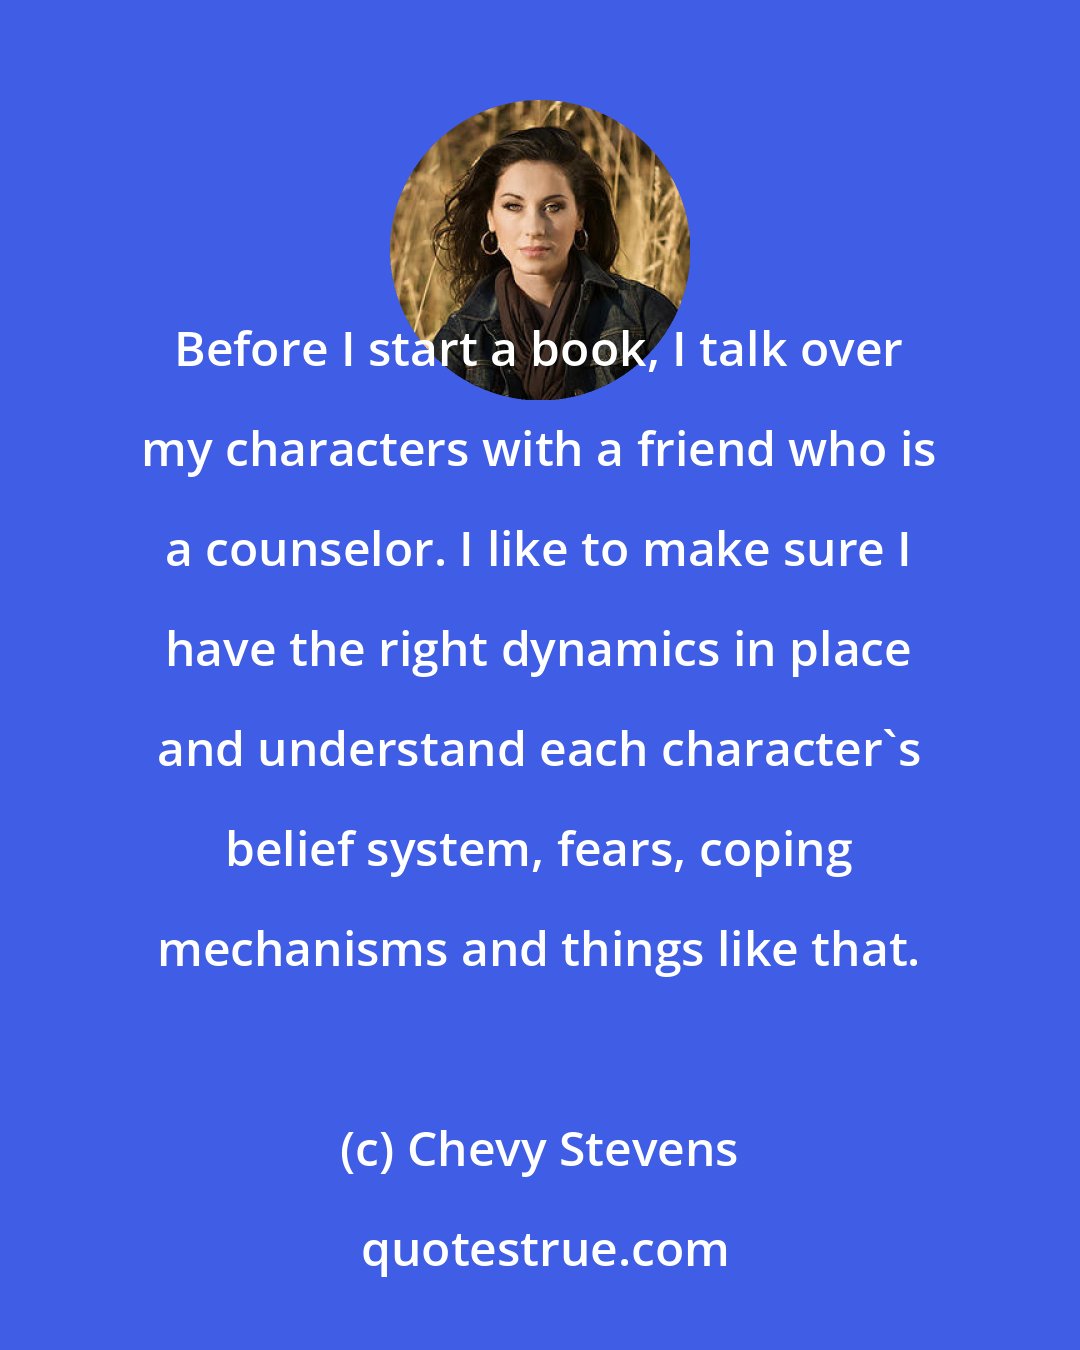 Chevy Stevens: Before I start a book, I talk over my characters with a friend who is a counselor. I like to make sure I have the right dynamics in place and understand each character's belief system, fears, coping mechanisms and things like that.